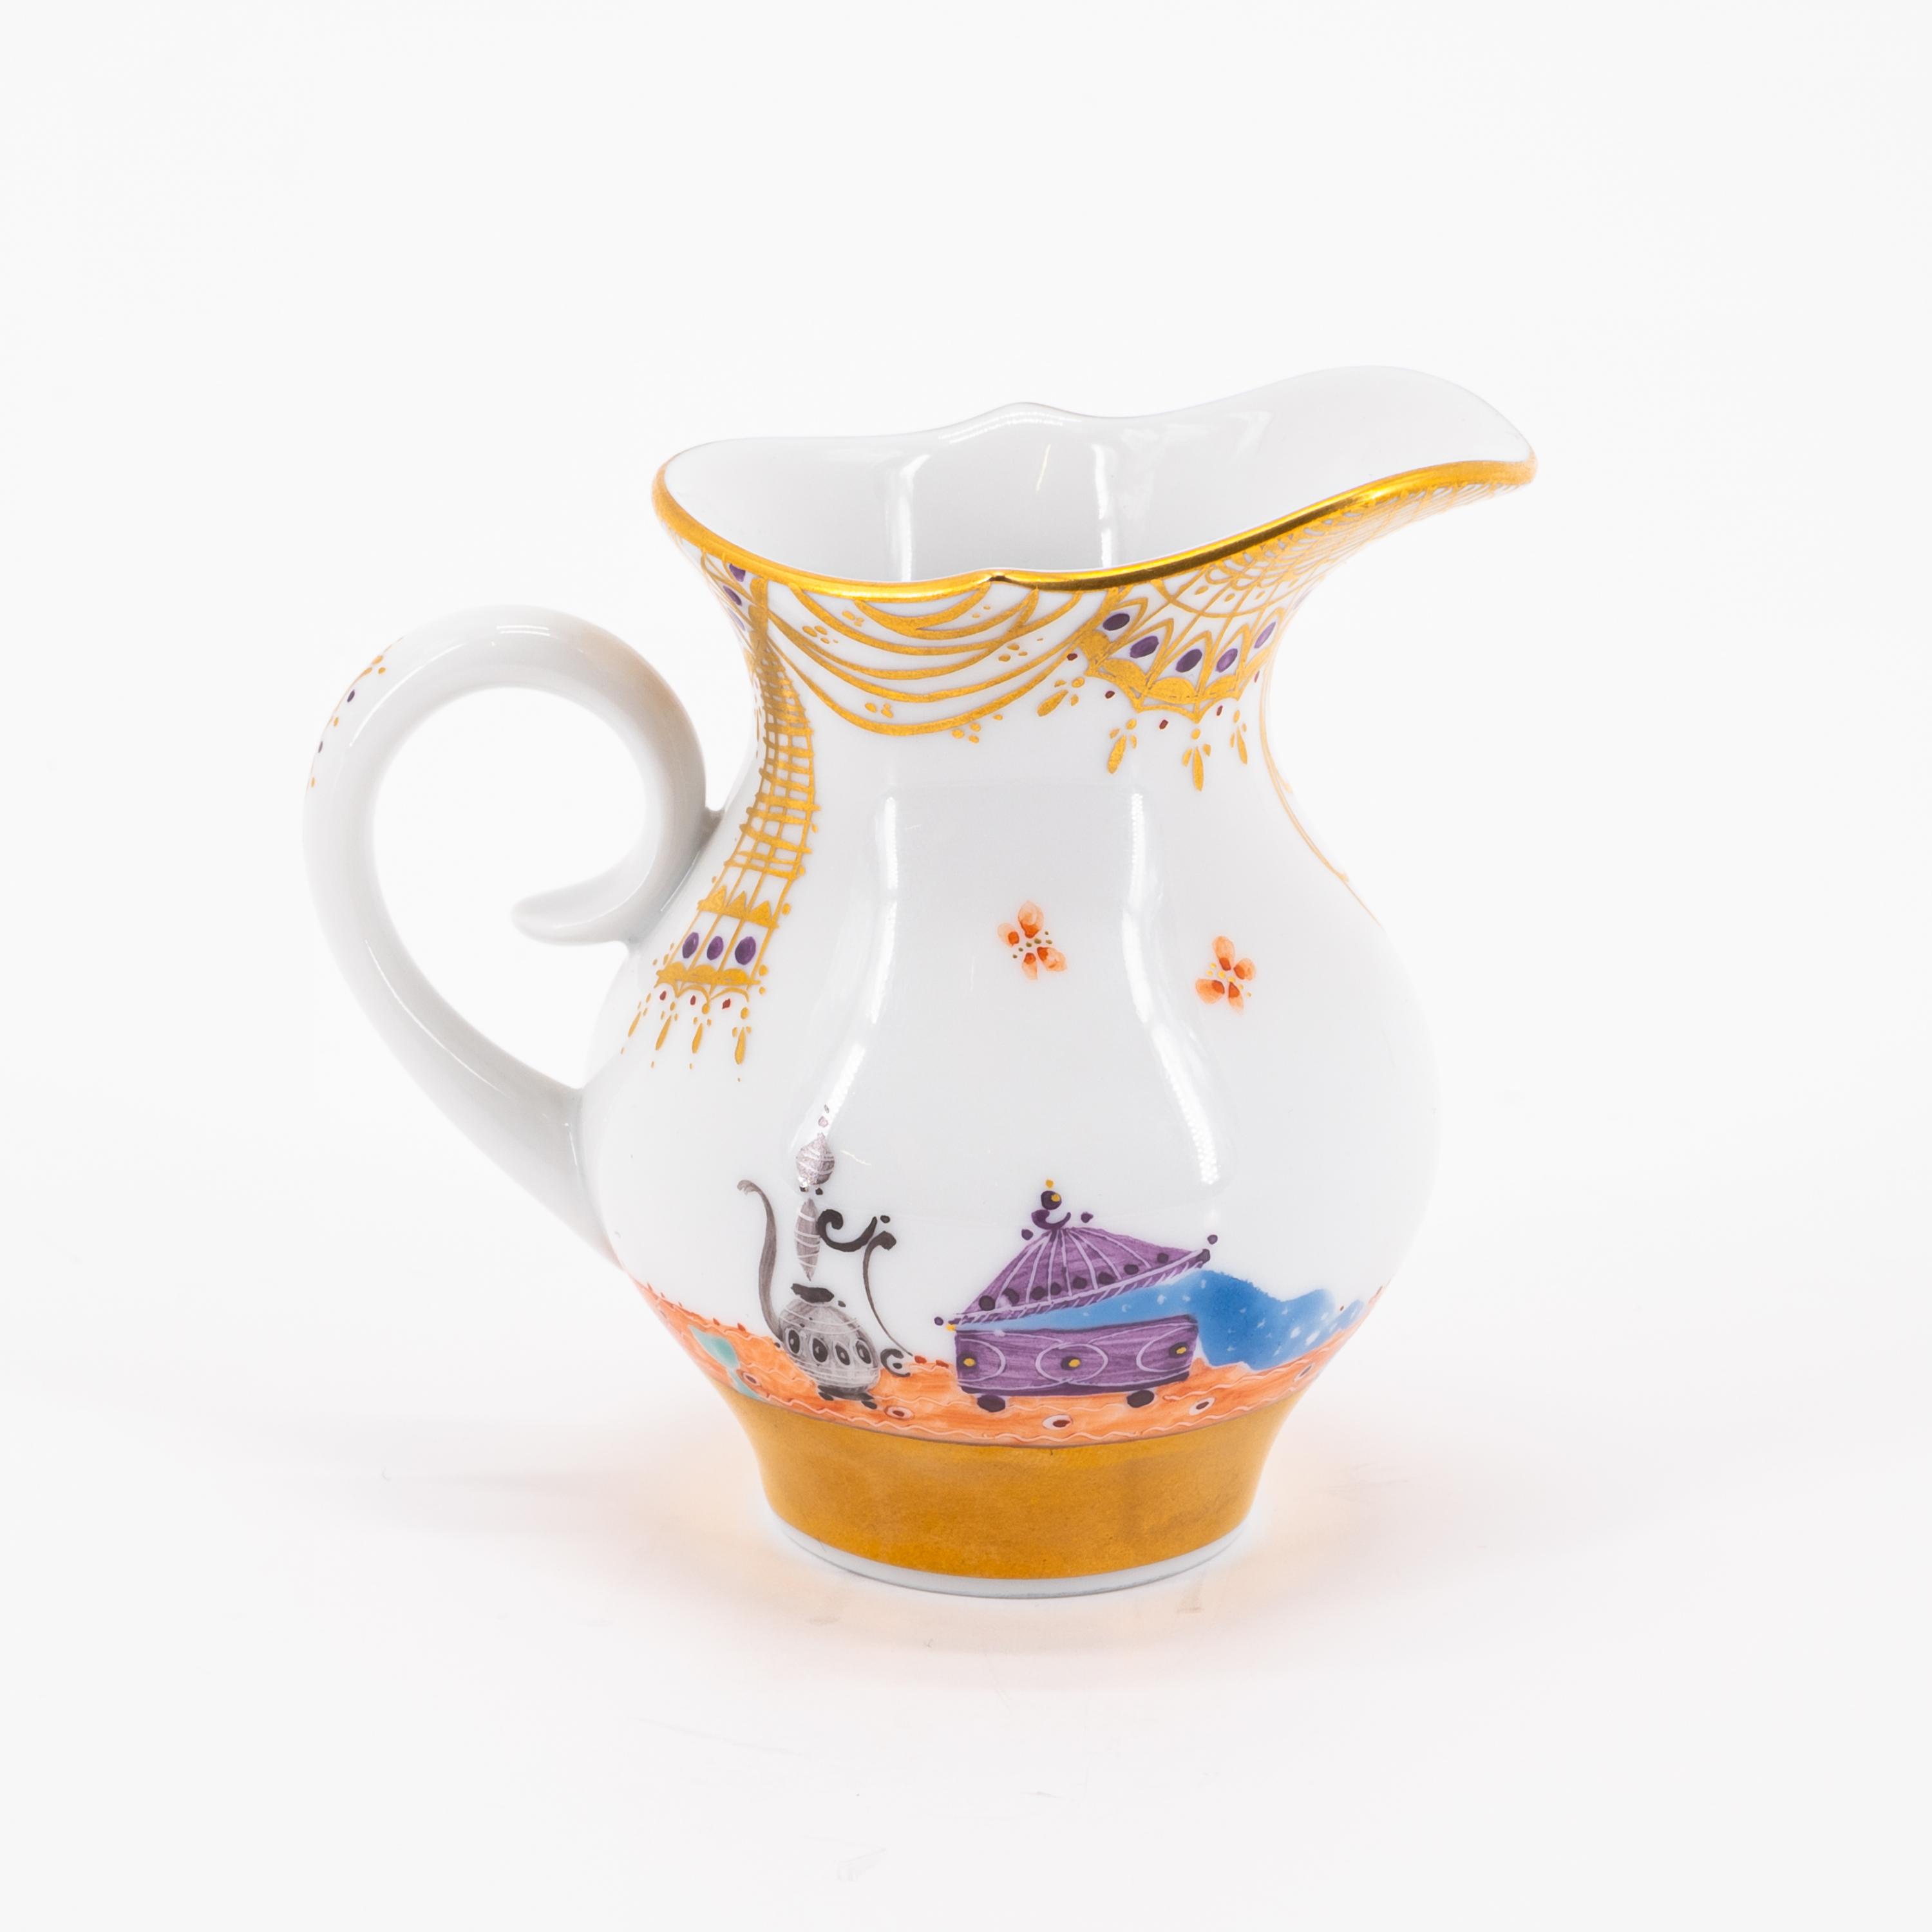 LARGE PORCELAIN COFFEE SERVICE WITH '1001 NIGHTS' DECOR FOR 12 PEOPLE - Image 17 of 19